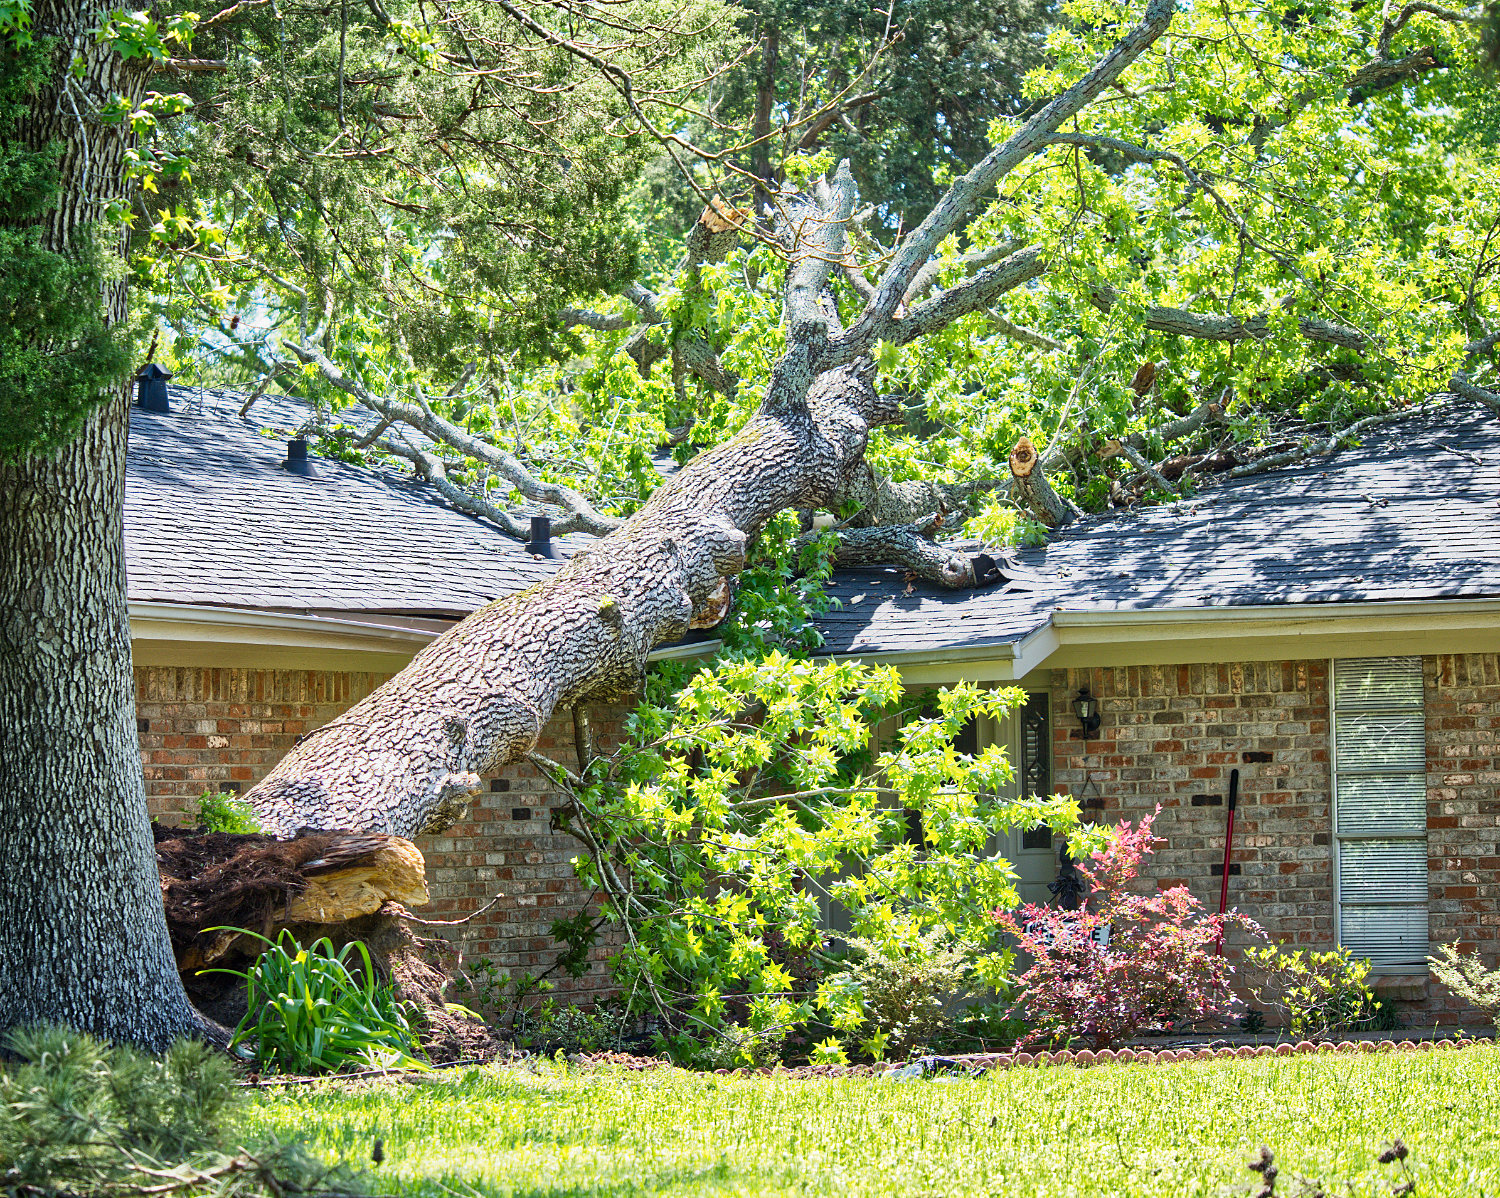 A home on McDonald St. in Mineola took a direct hit from a fallen oak tree.